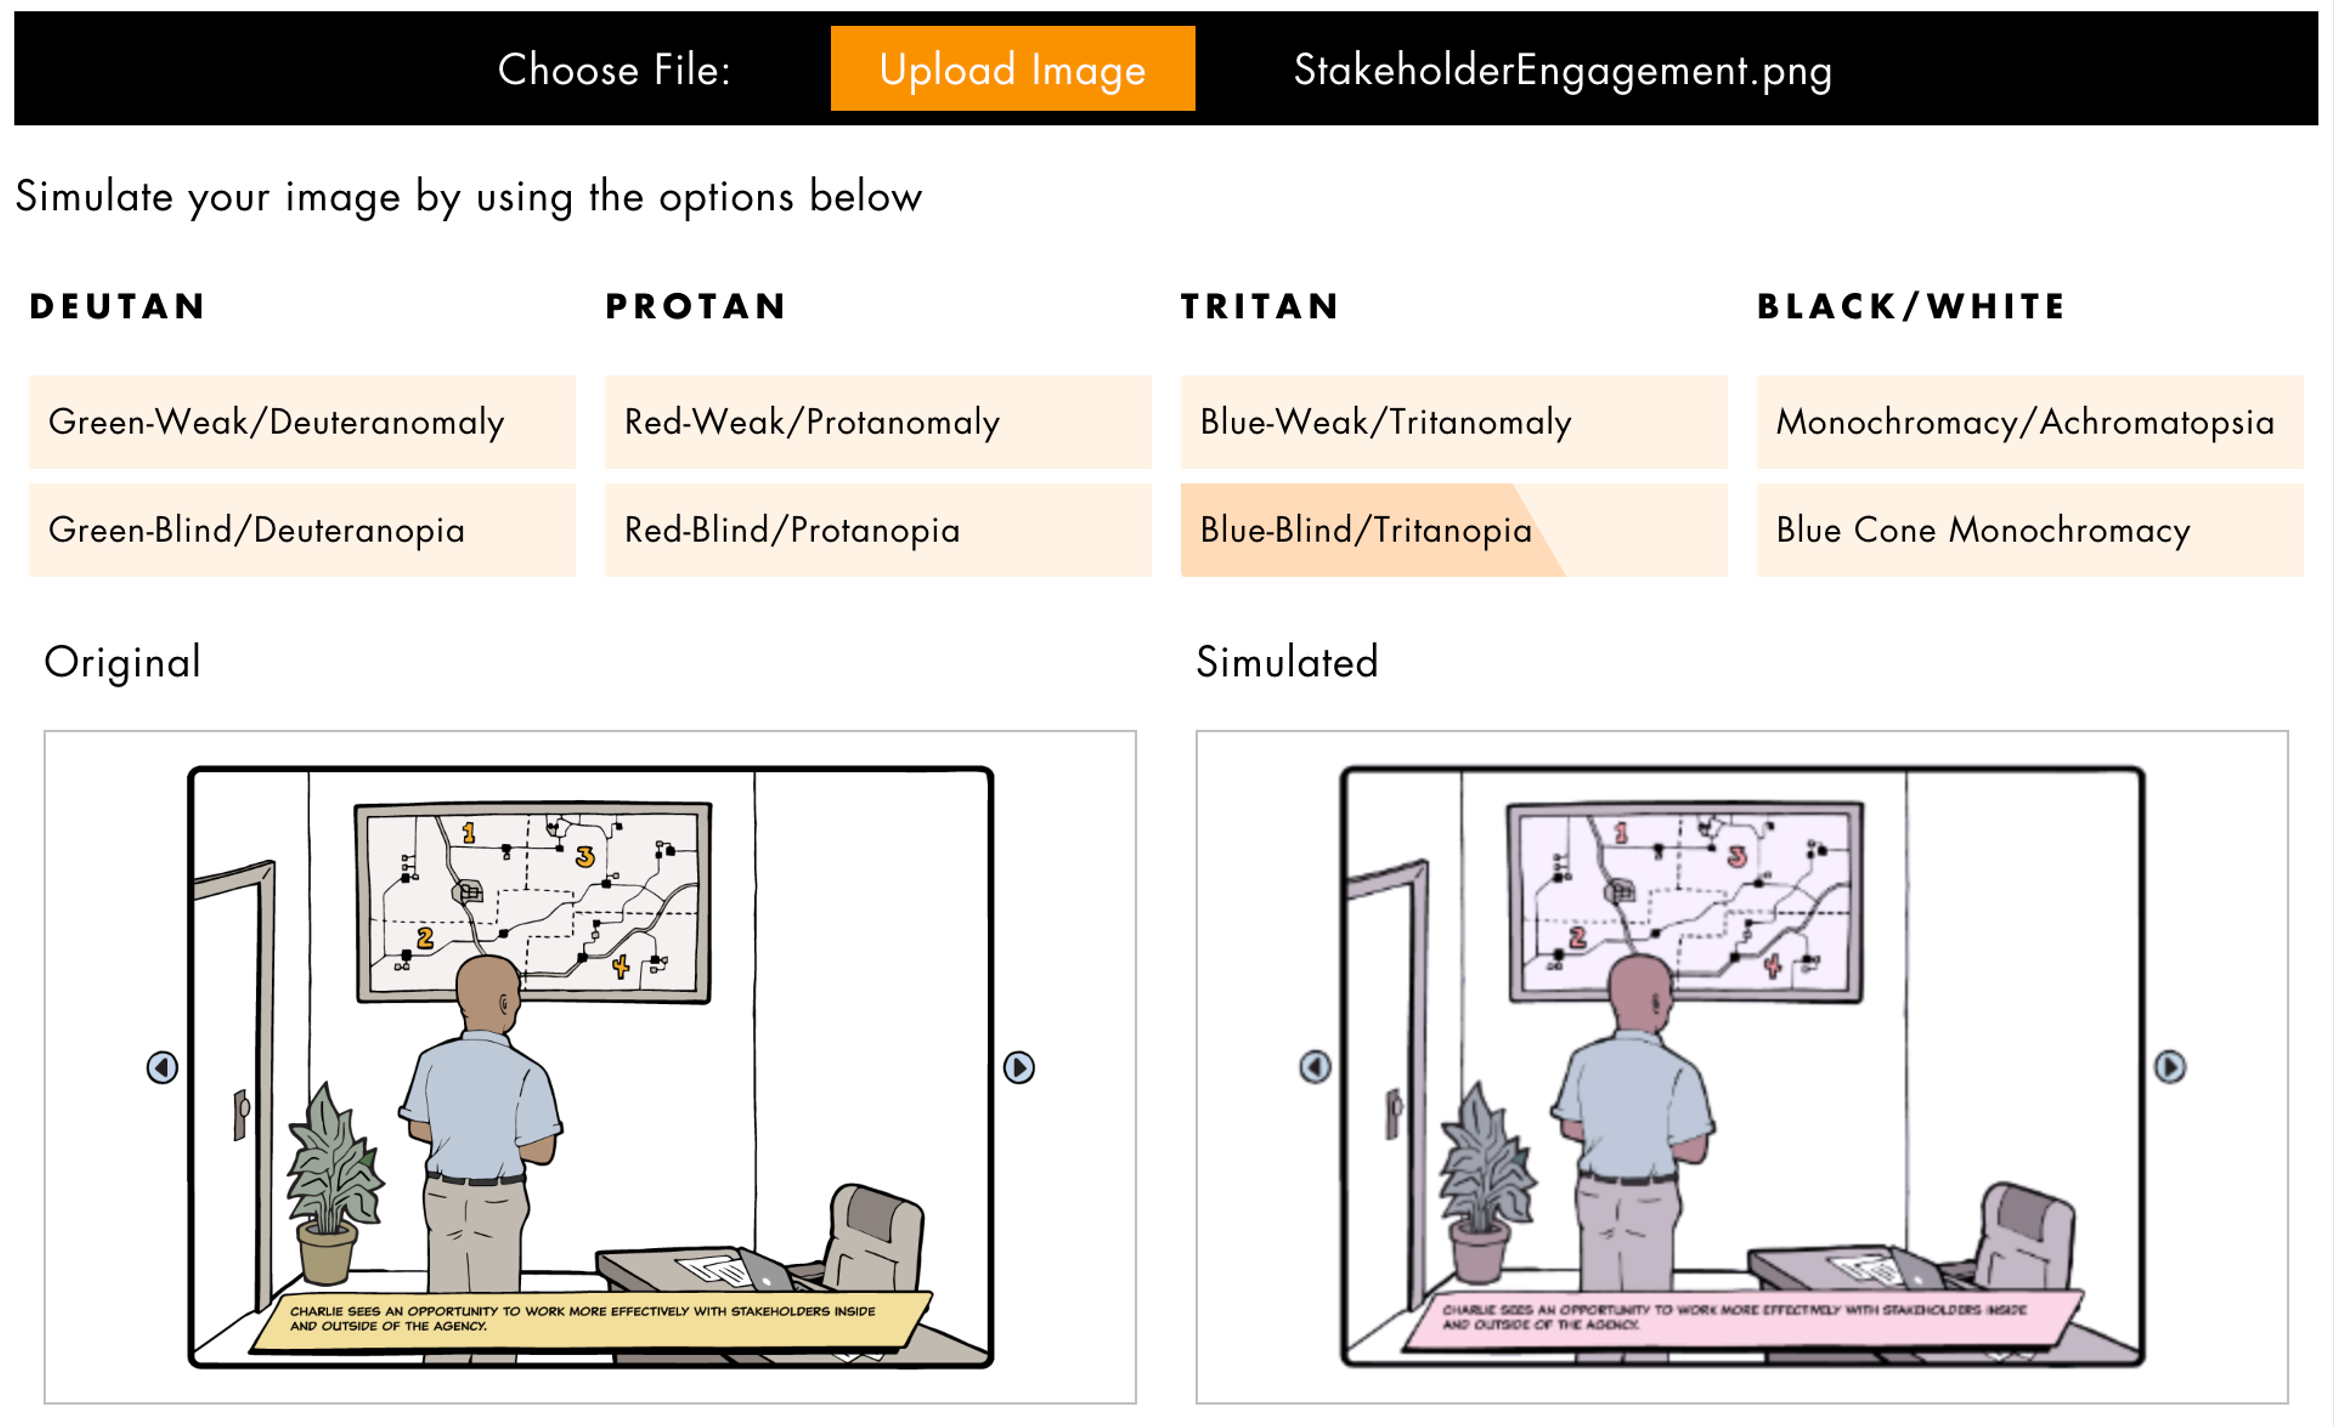 Screenshots of two eLearning courses—one with a Deutan check that shows the change in color from bright teal to a muted blue and a tritan check that shows the change in color from muted yellows and browns to shades of pink.